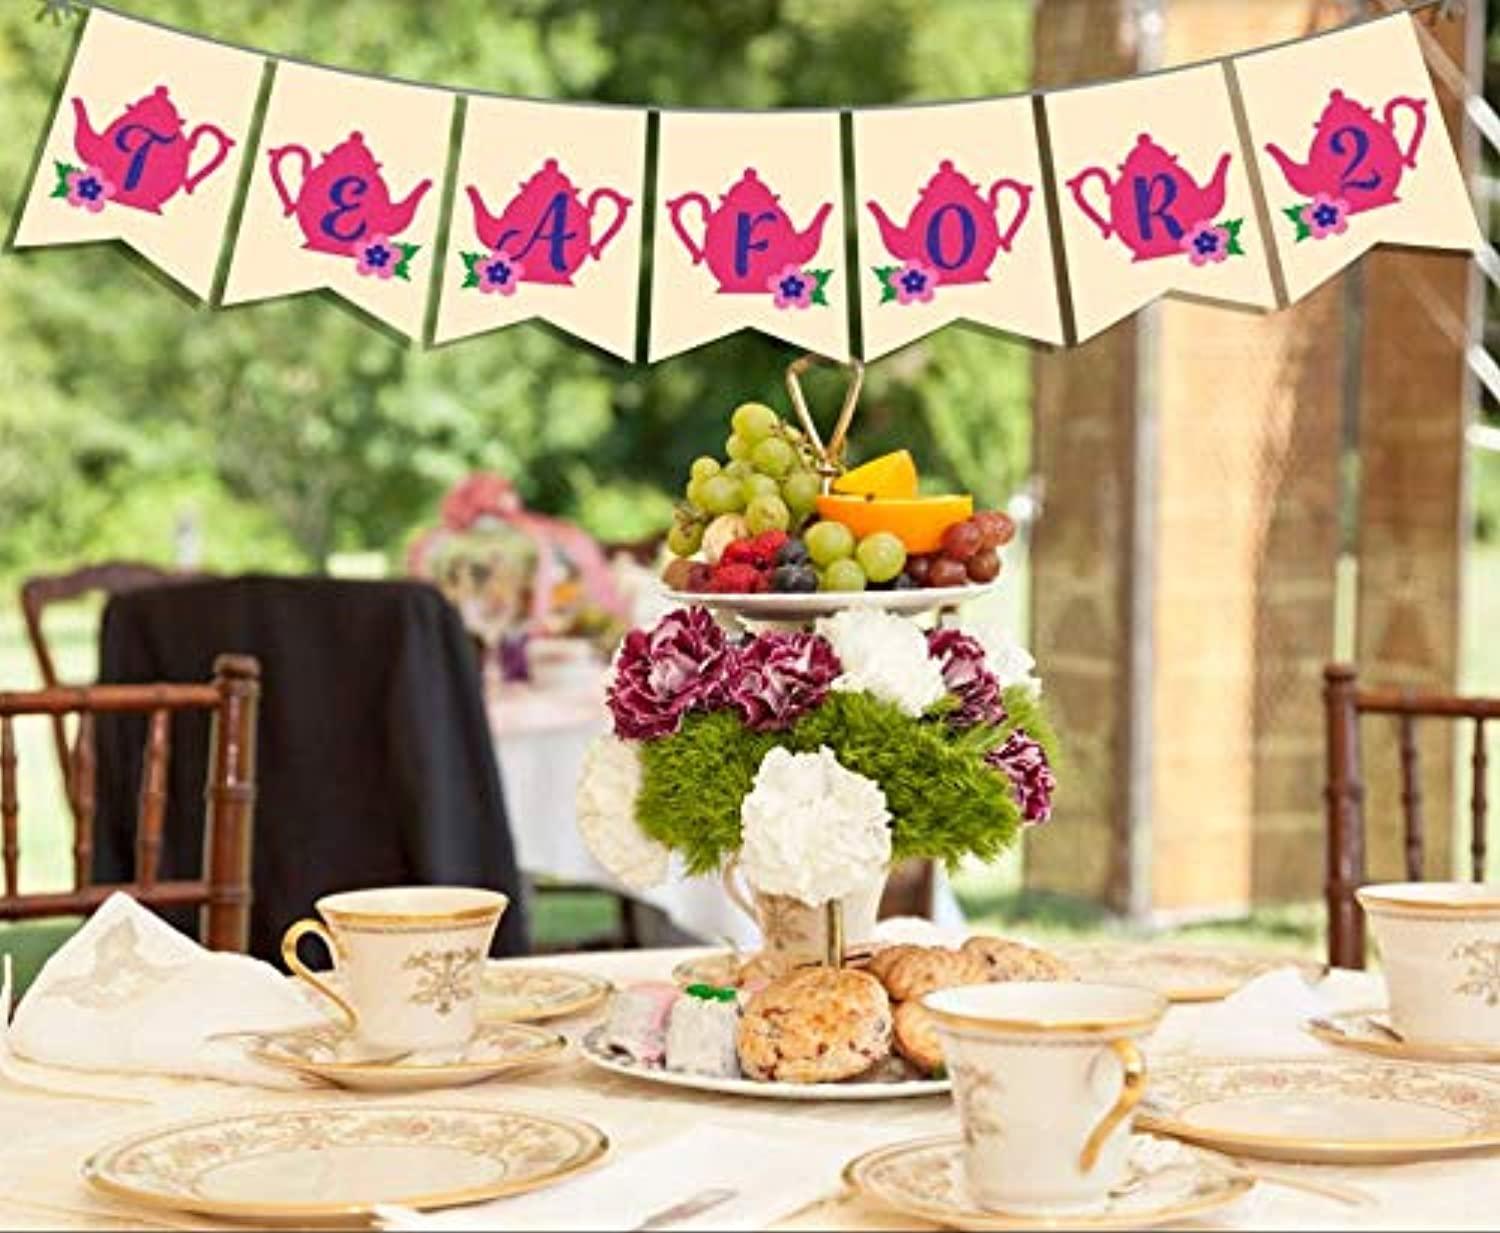 Alice in Wonderland Tea Time 5th Birthday Party Supplies Mad